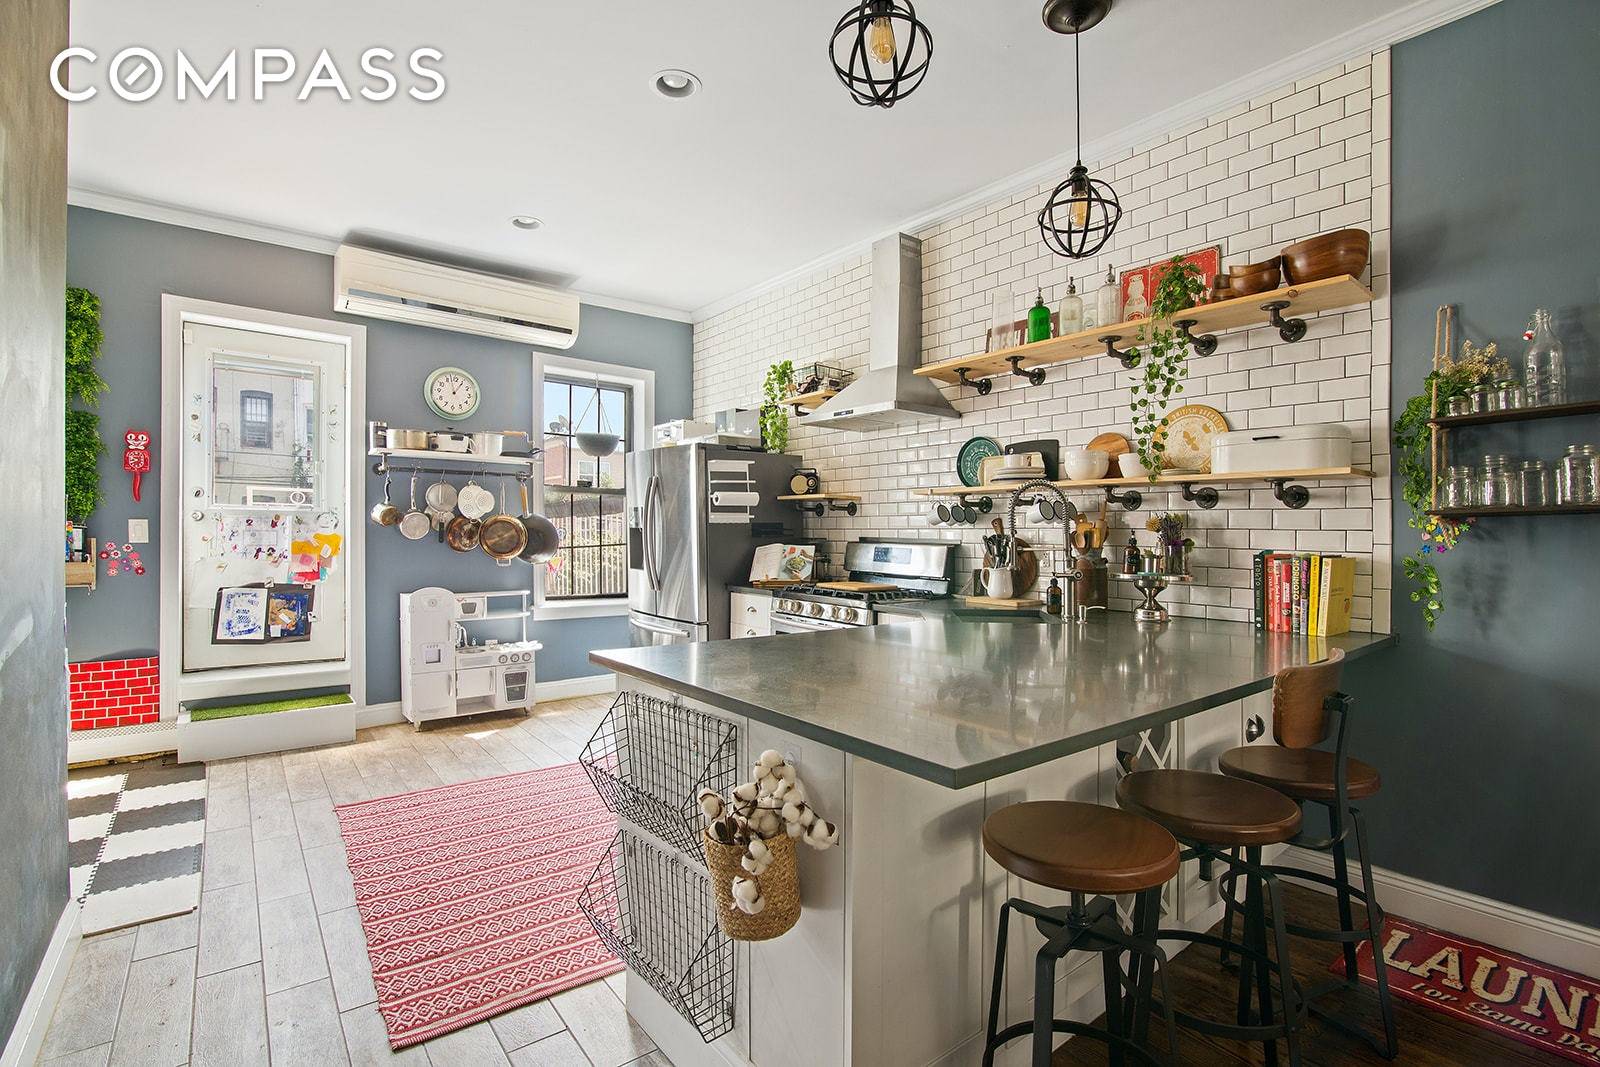 Step into 1198 Halsey Street and be instantly delighted by original details carefully blended with newly renovated features in this classic Bushwick townhouse.